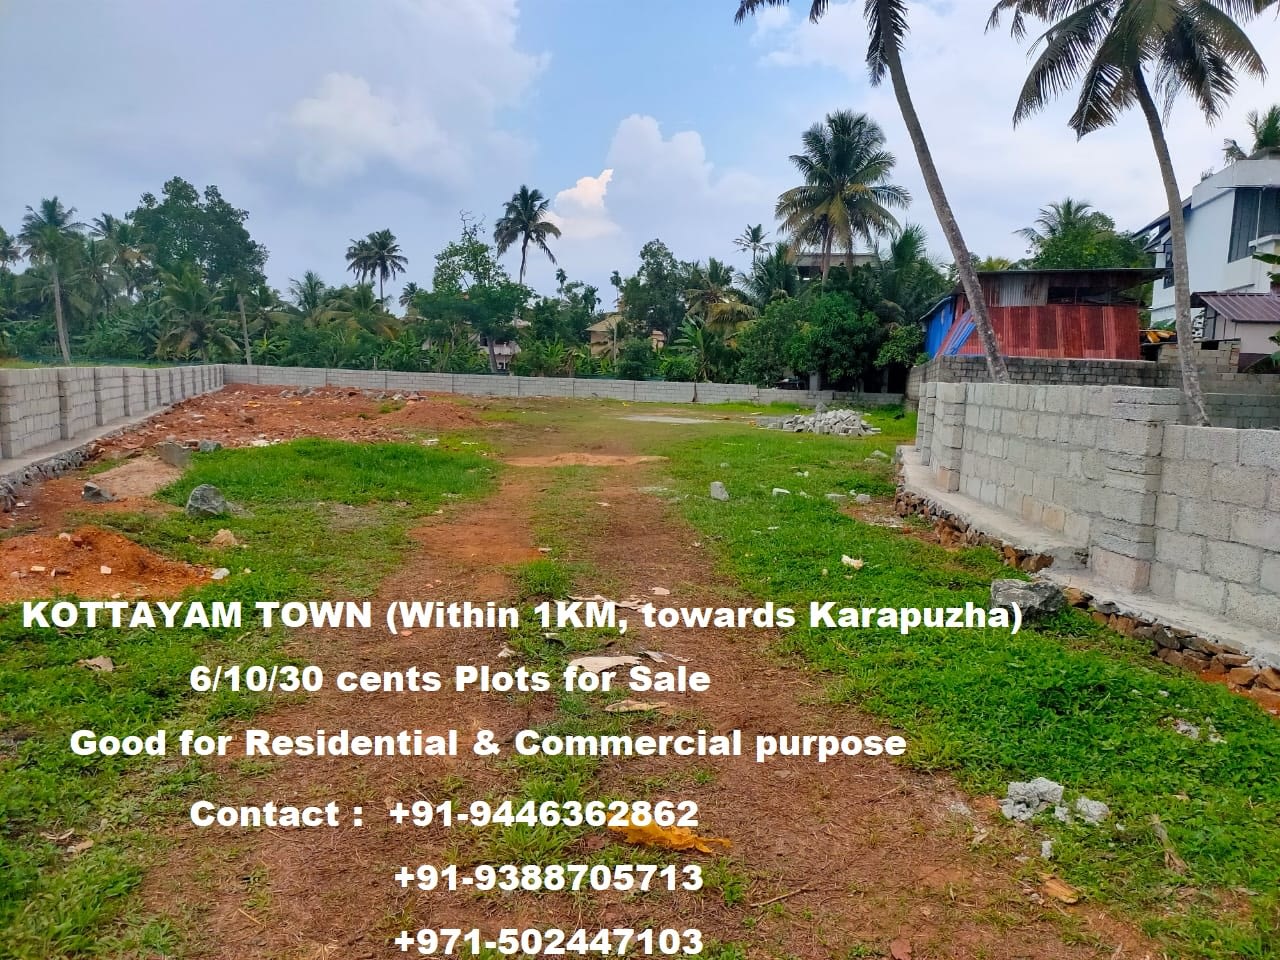 6/10/30 cents Plots ( Residential & Commercial purpose) for Sale at Kottayam Town